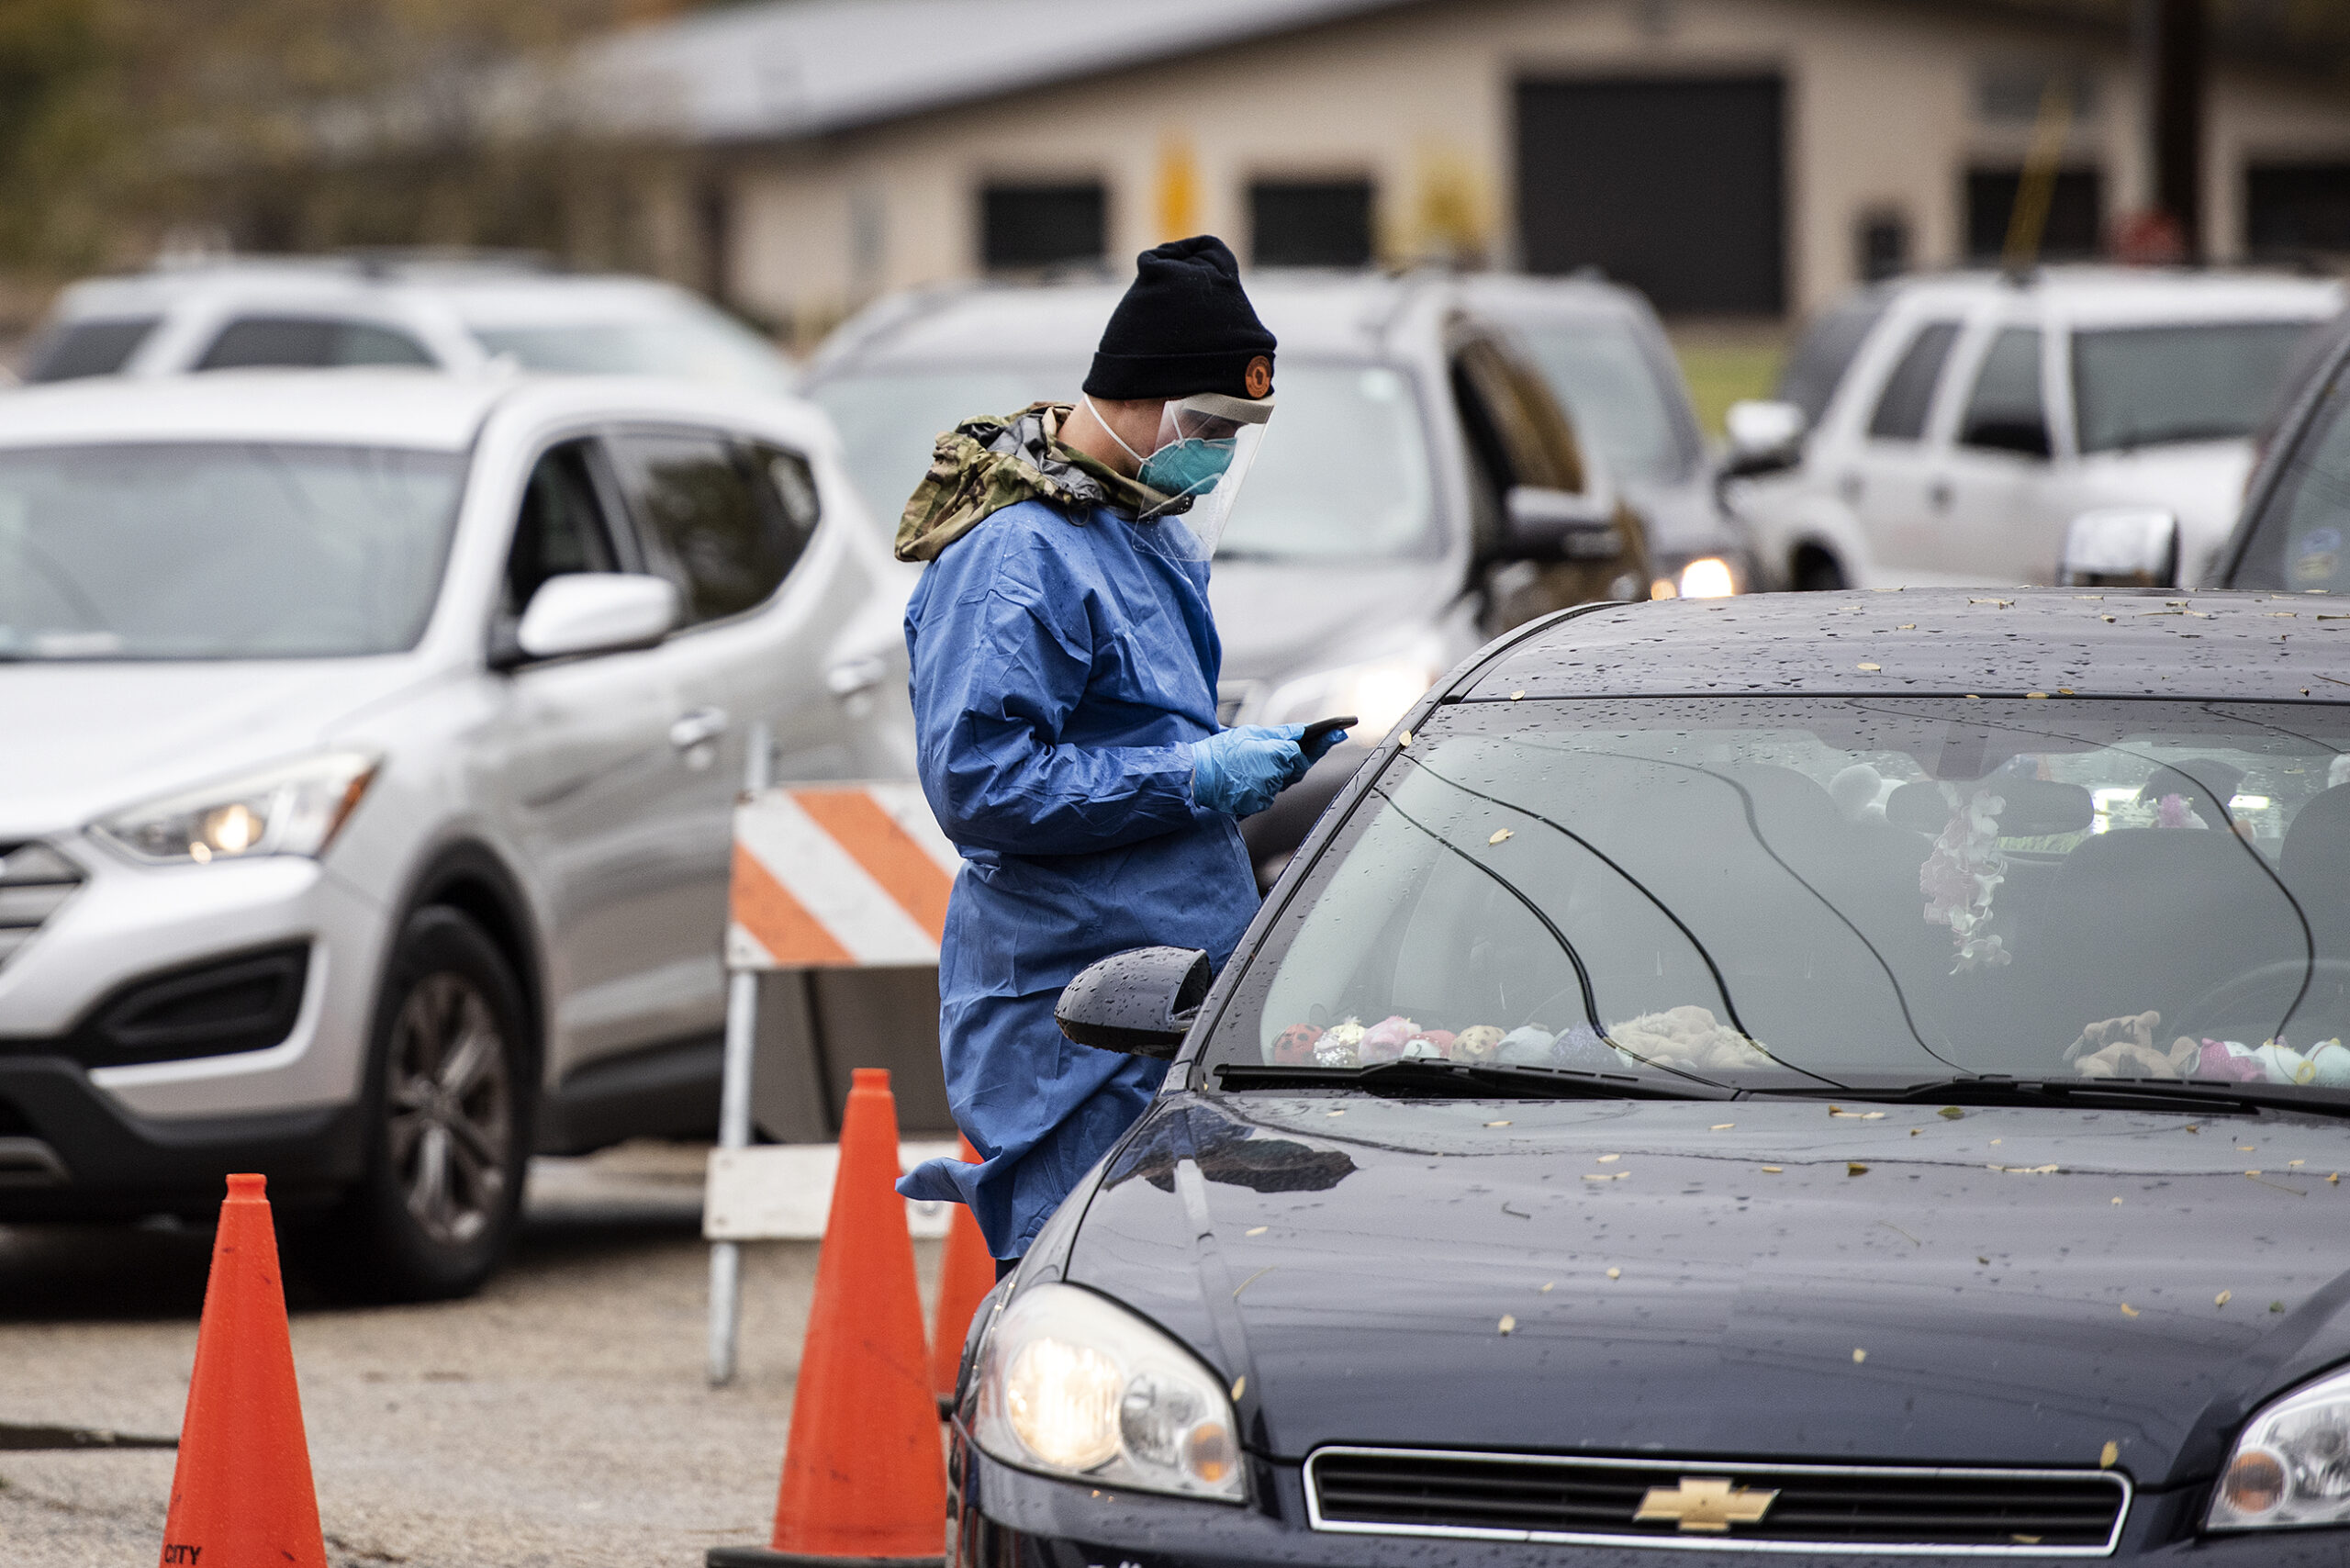 a man in a blue gown and face covering uses a phone as he approaches a vehicle in line for the test